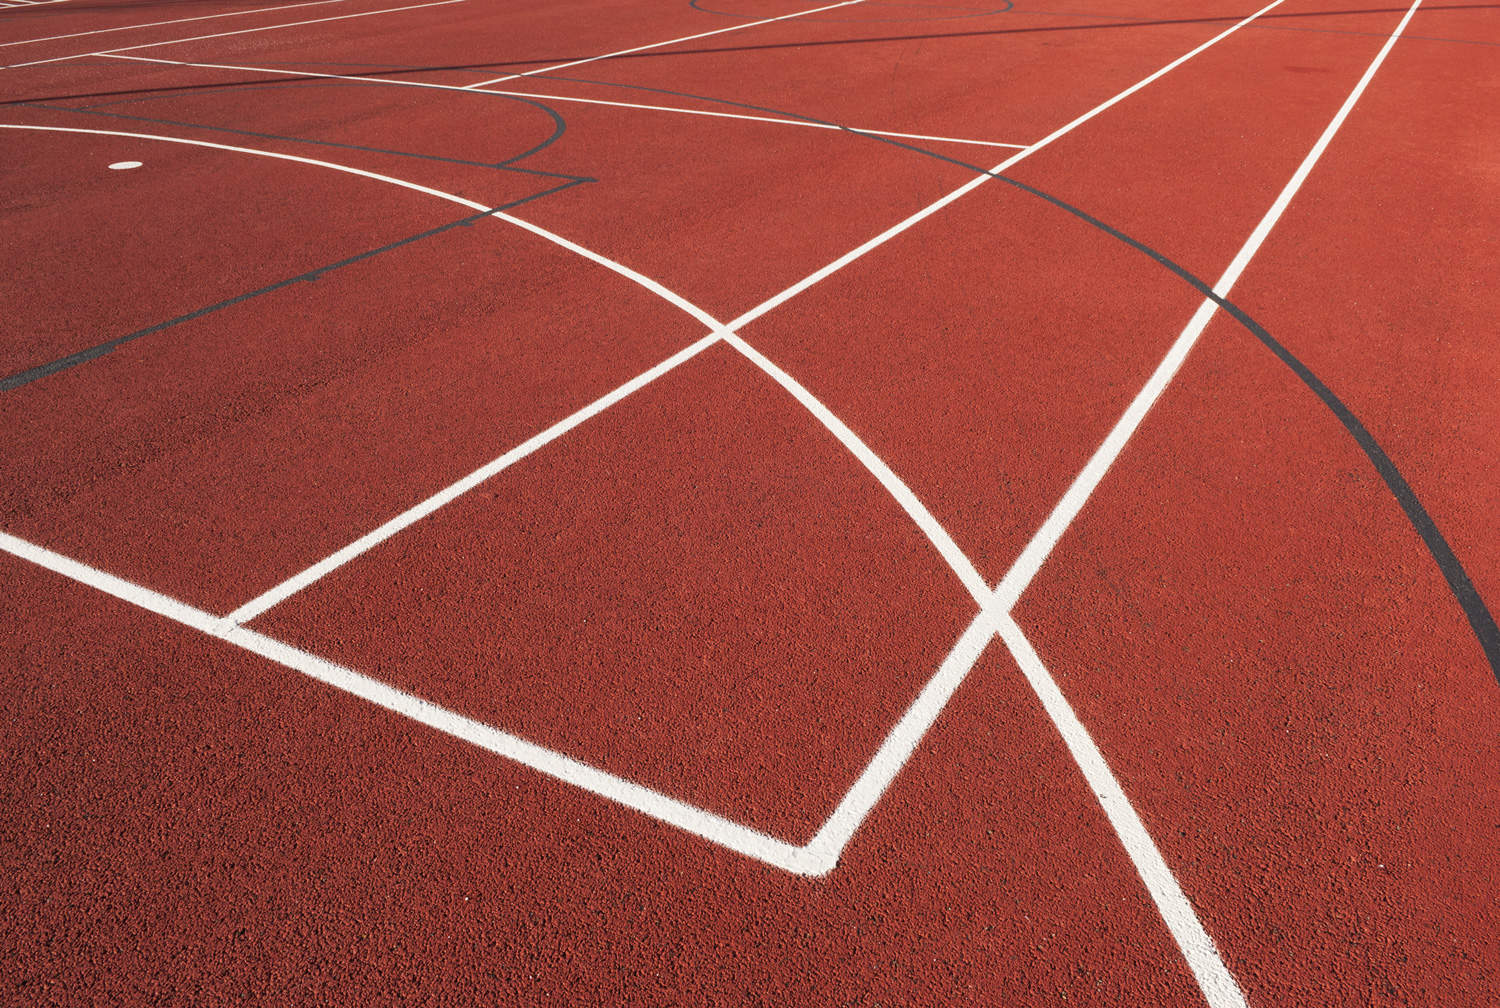 Close up of painted lines on an outdoor sports surface.